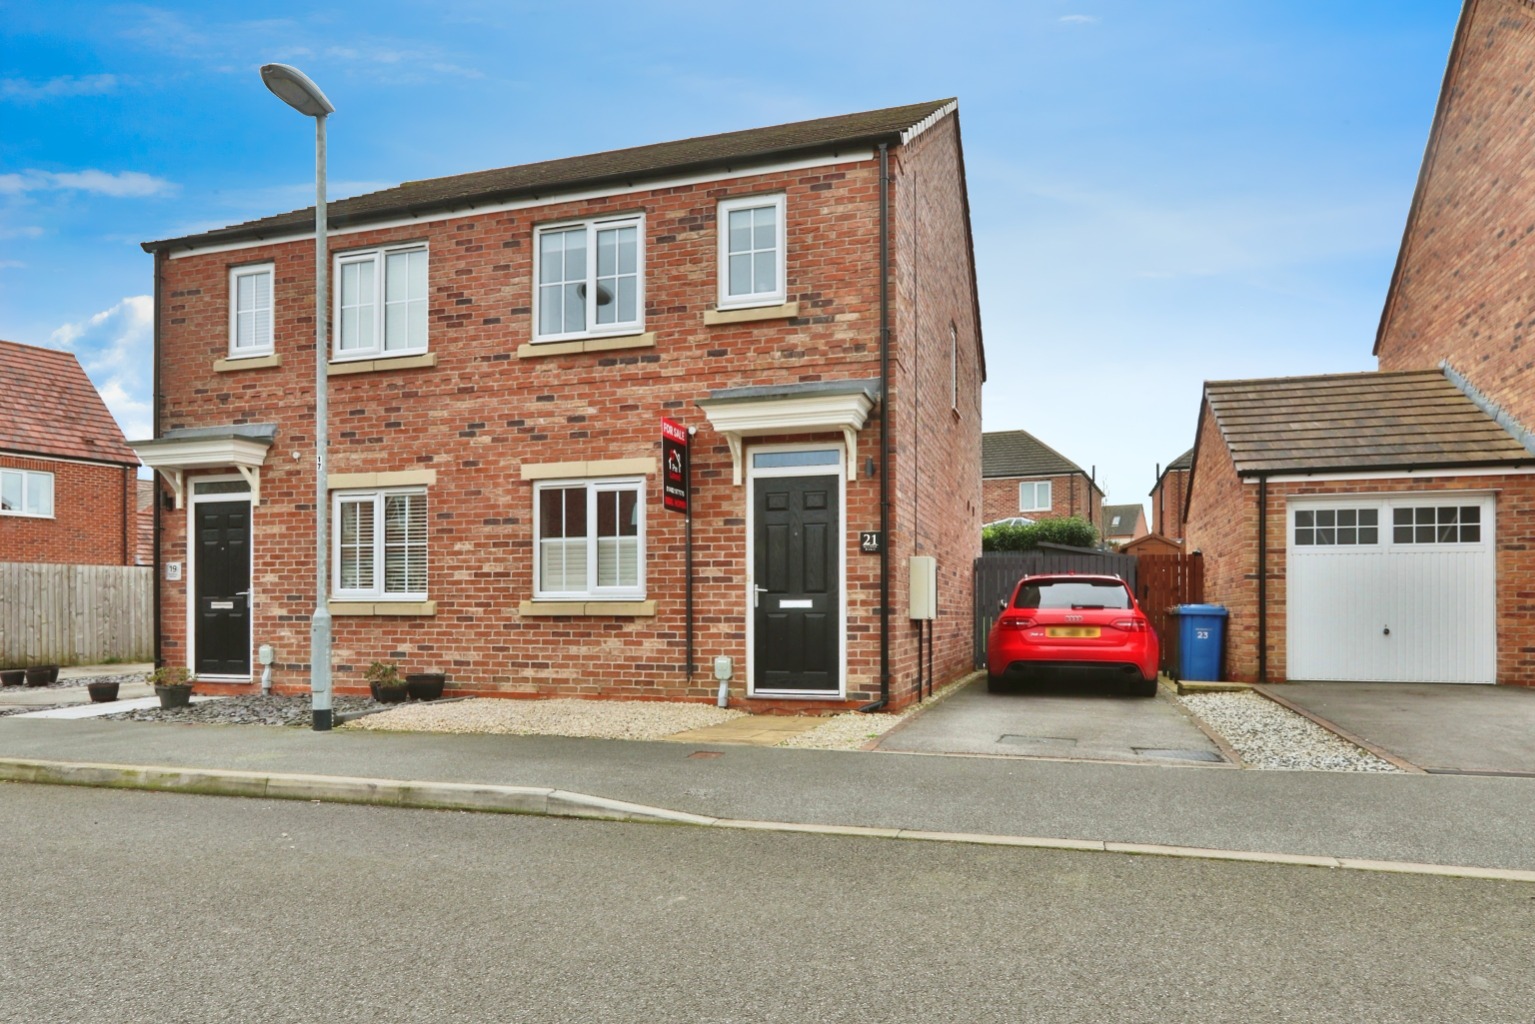 2 bed semi-detached house for sale in Mulberry Avenue, Beverley - Property Image 1